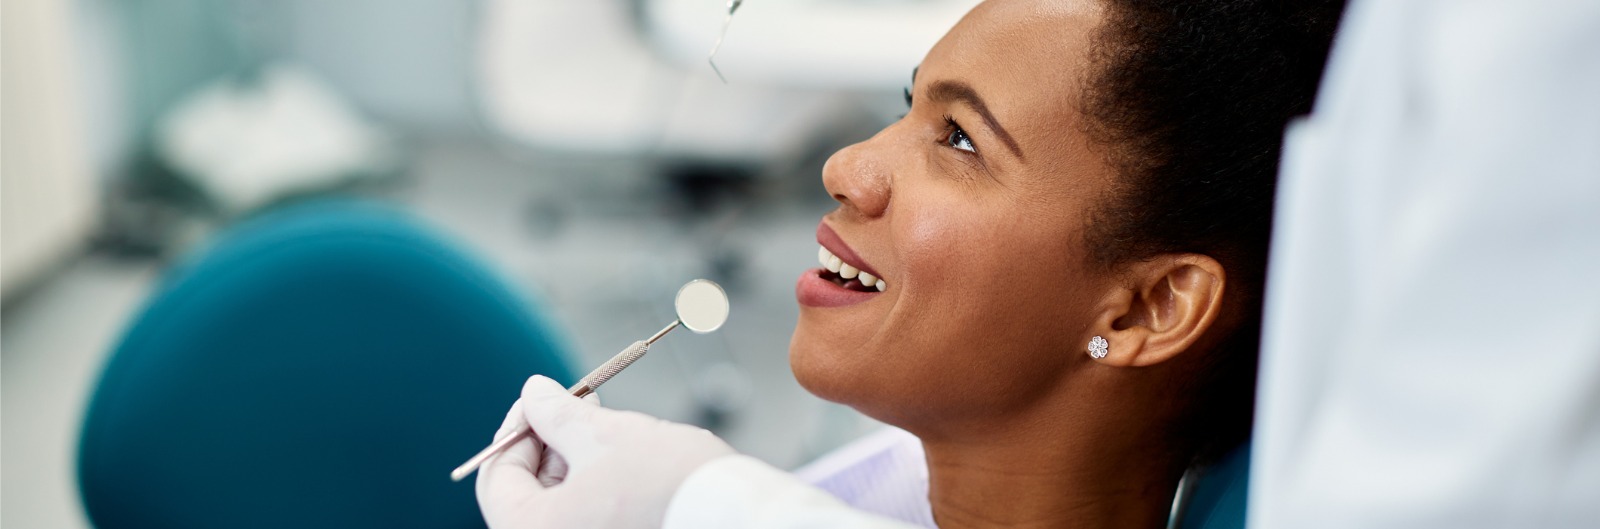 happy-african-american-woman-during-appointment-at-dentist-office-picture-id1340829882.jpg